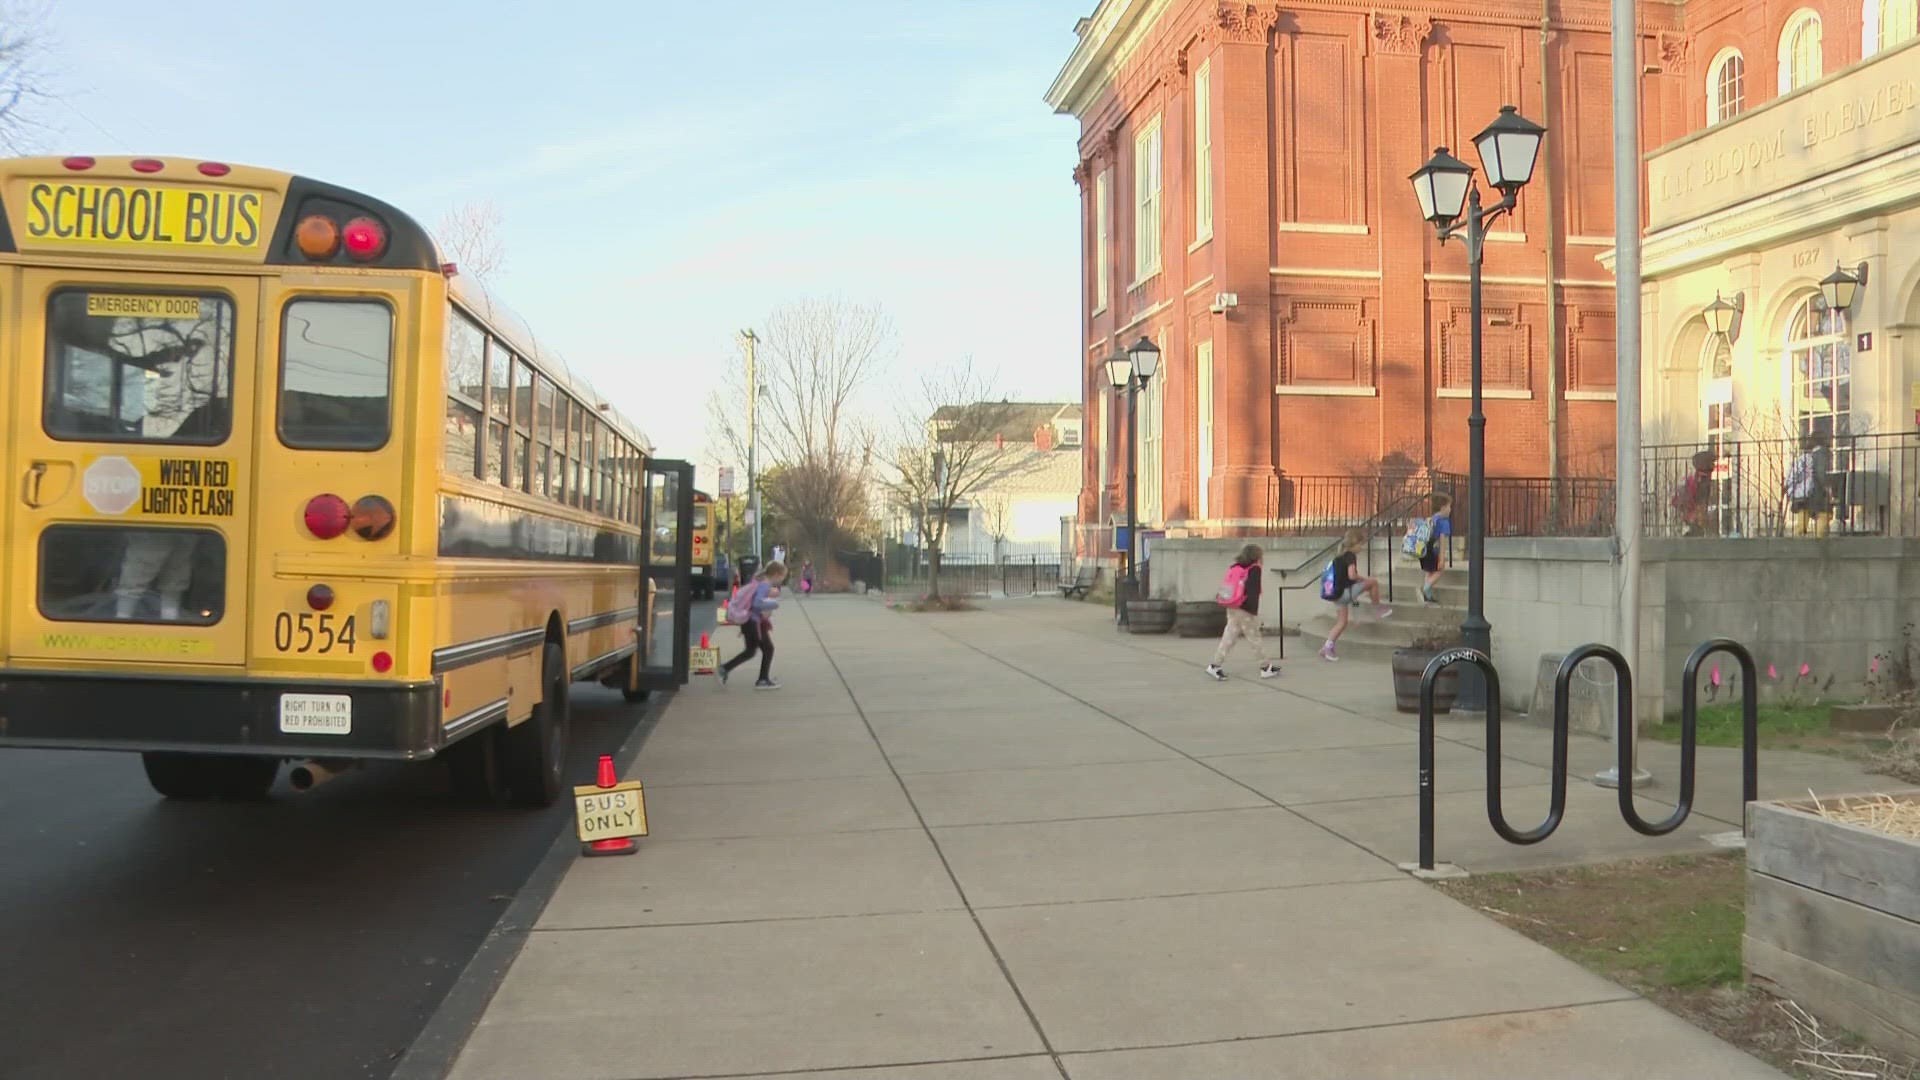 On Tuesday, the JCPS board is set to vote on a proposal that will change start times in several schools.